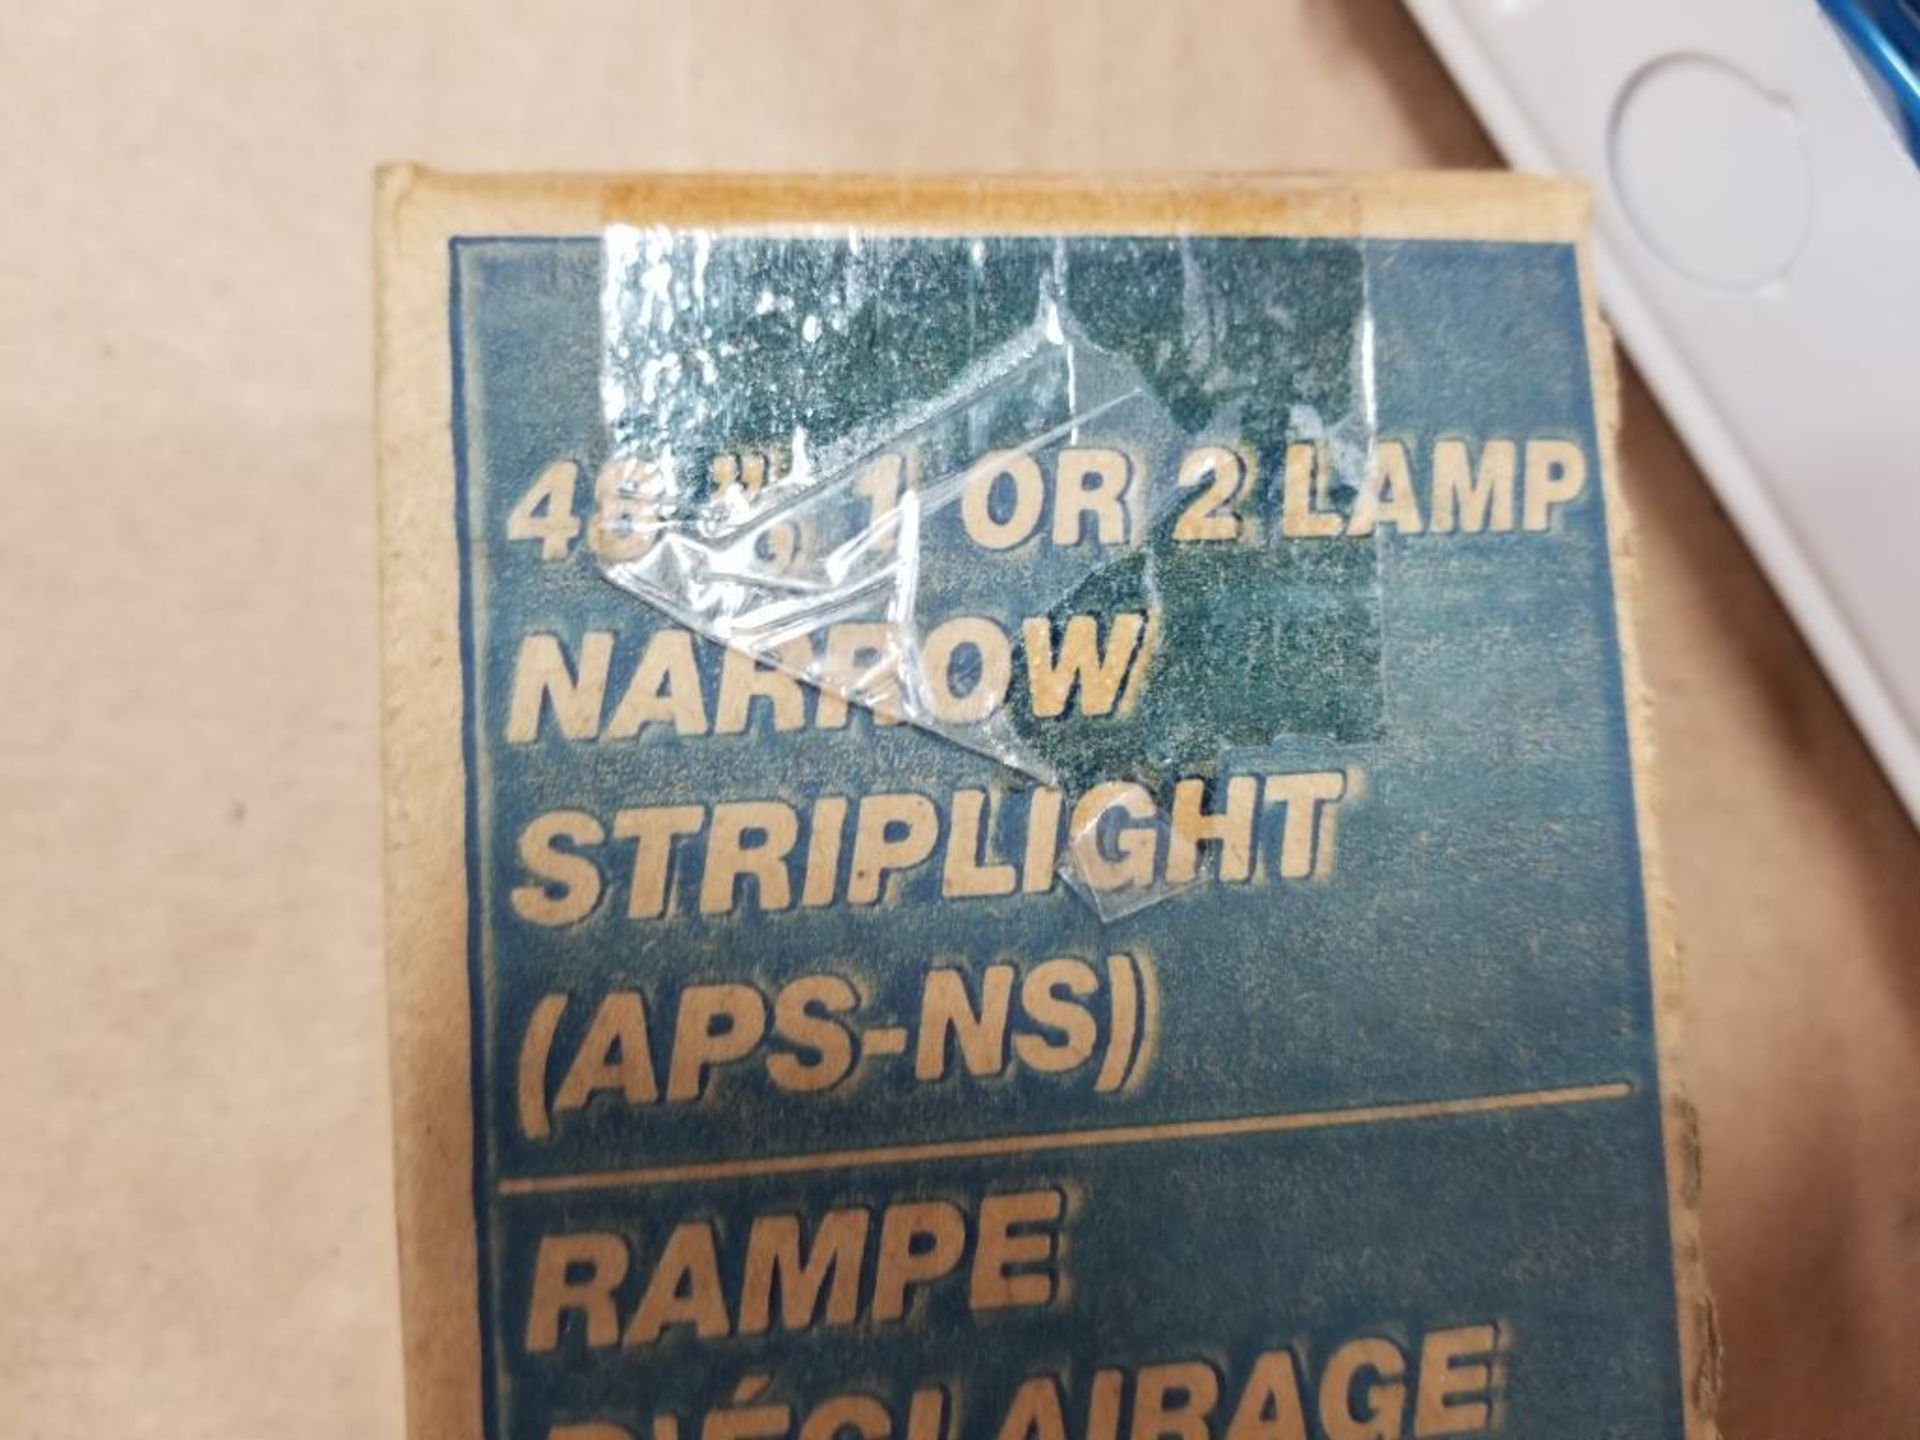 Qty 20 - 48" 1 or 2 lamp narrow striplight. APS-NS. - Image 2 of 4